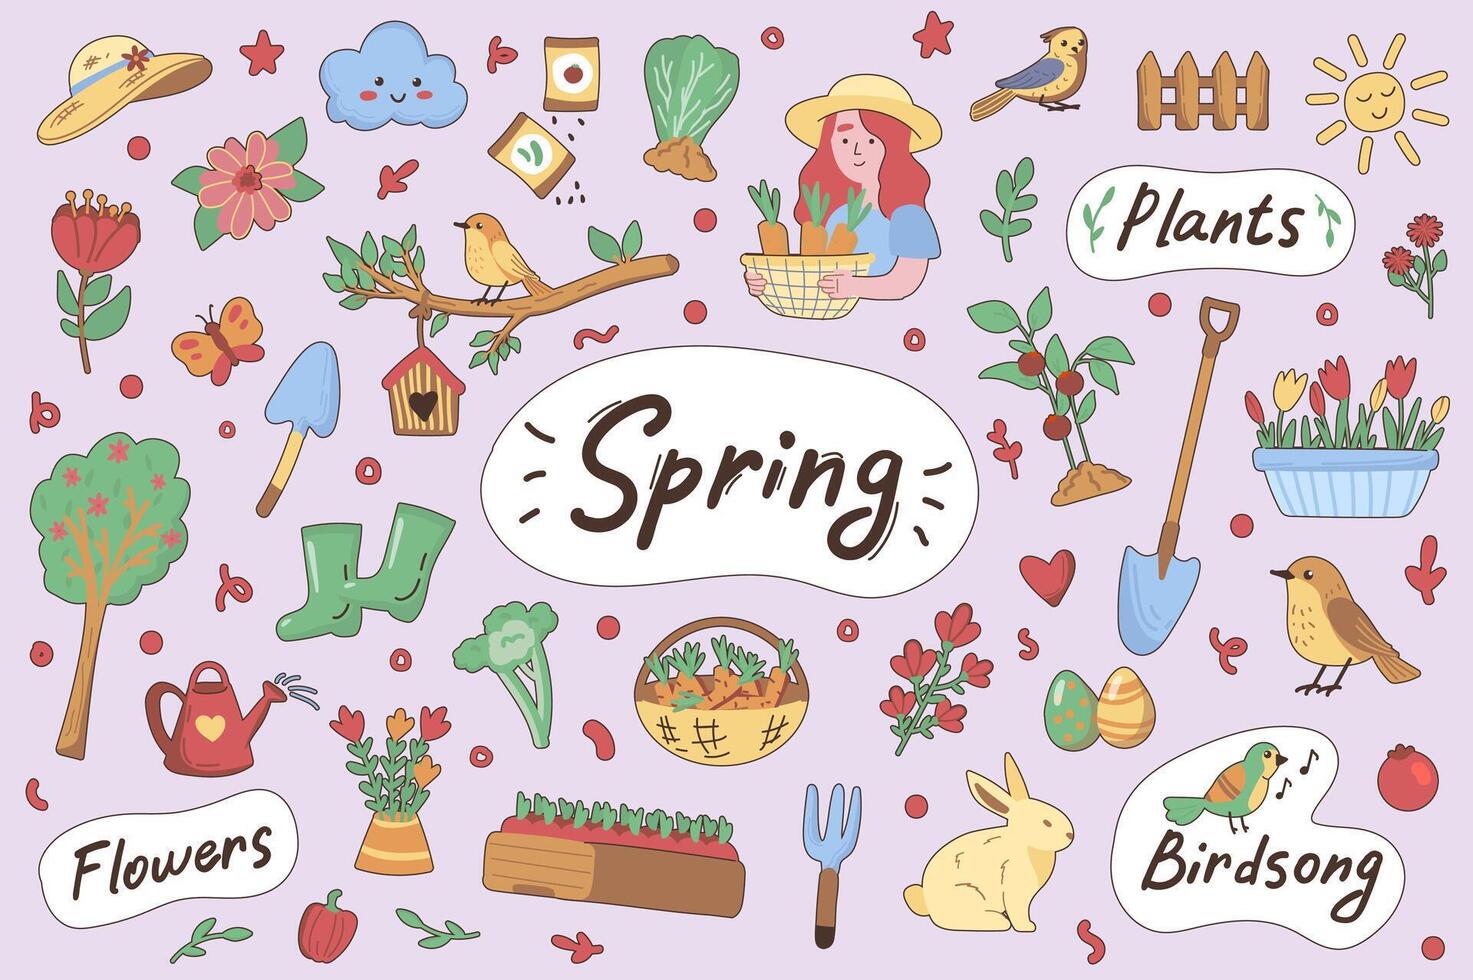 Spring cute stickers set in flat cartoon design. Collection of flower, plant, bird, song, bunny, vegetable, rubber boots, watering can and other. Vector illustration for planner or organizer template